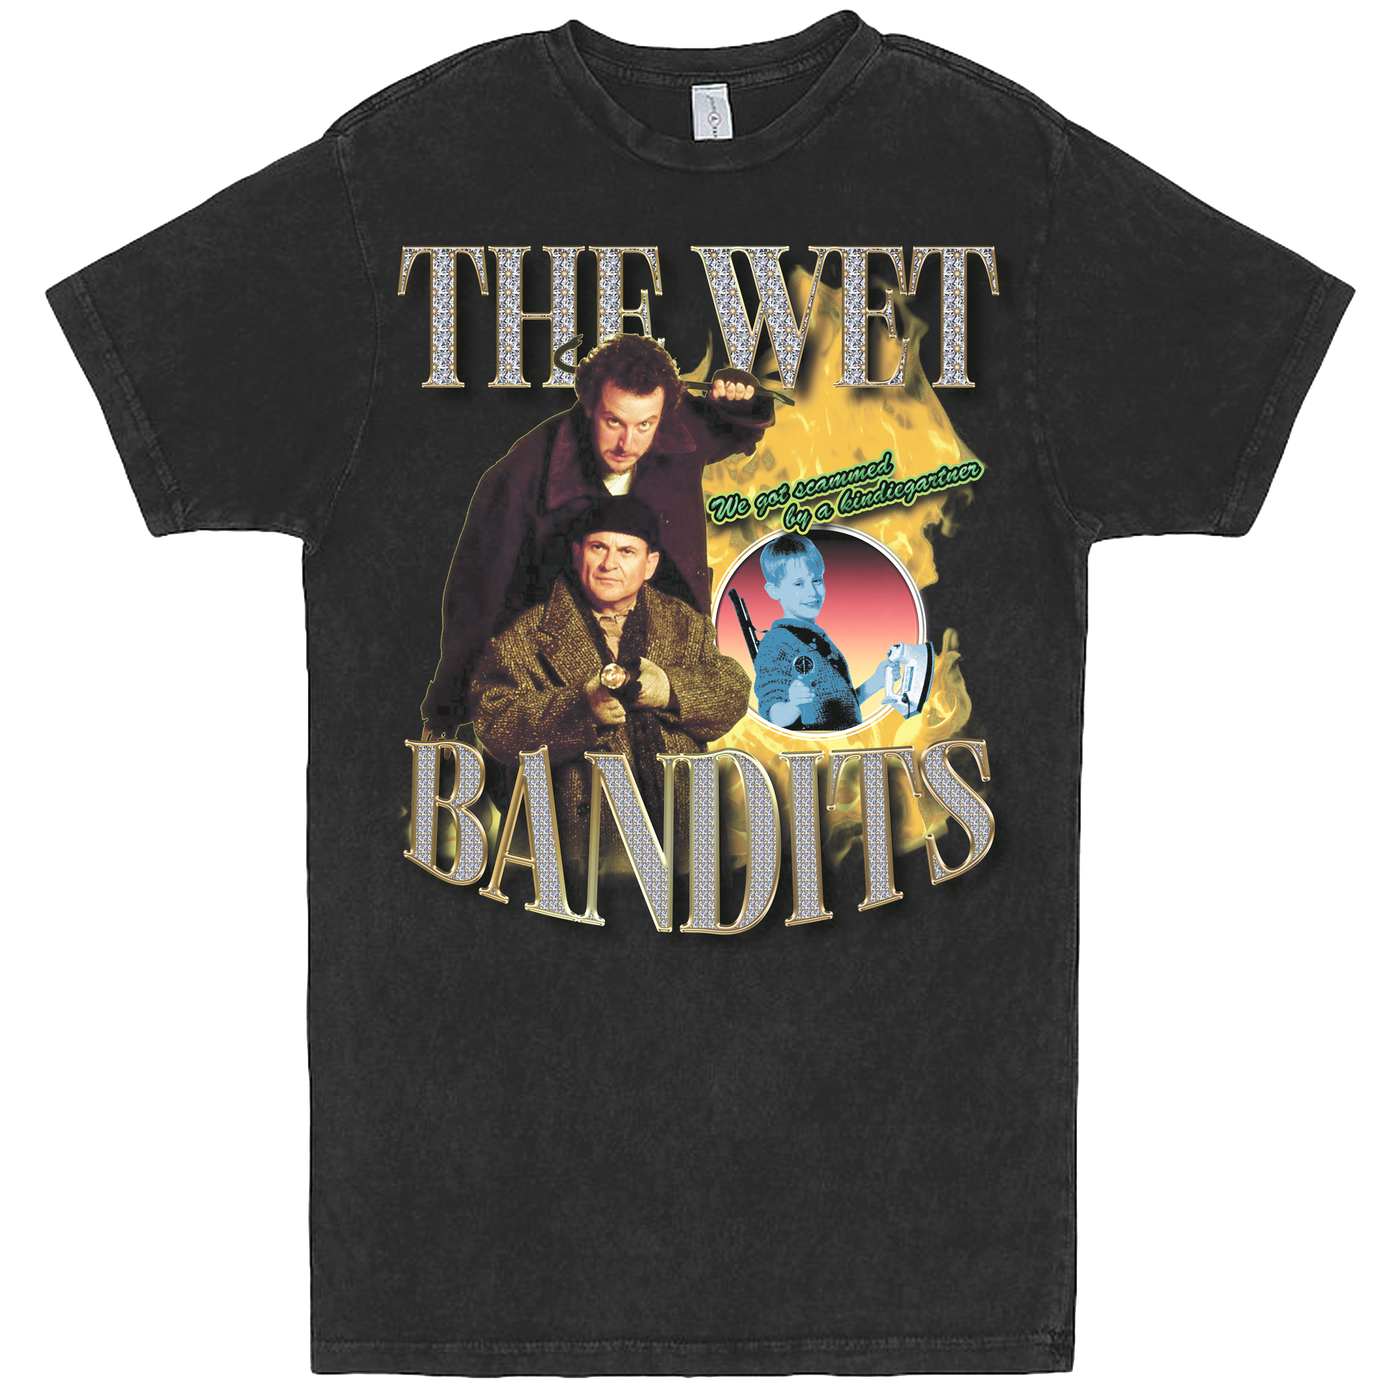 Home Alone Christmas Movie The Wet Bandits Bootleg Style T-Shirt. Printed on a lane 7 vintage black tee